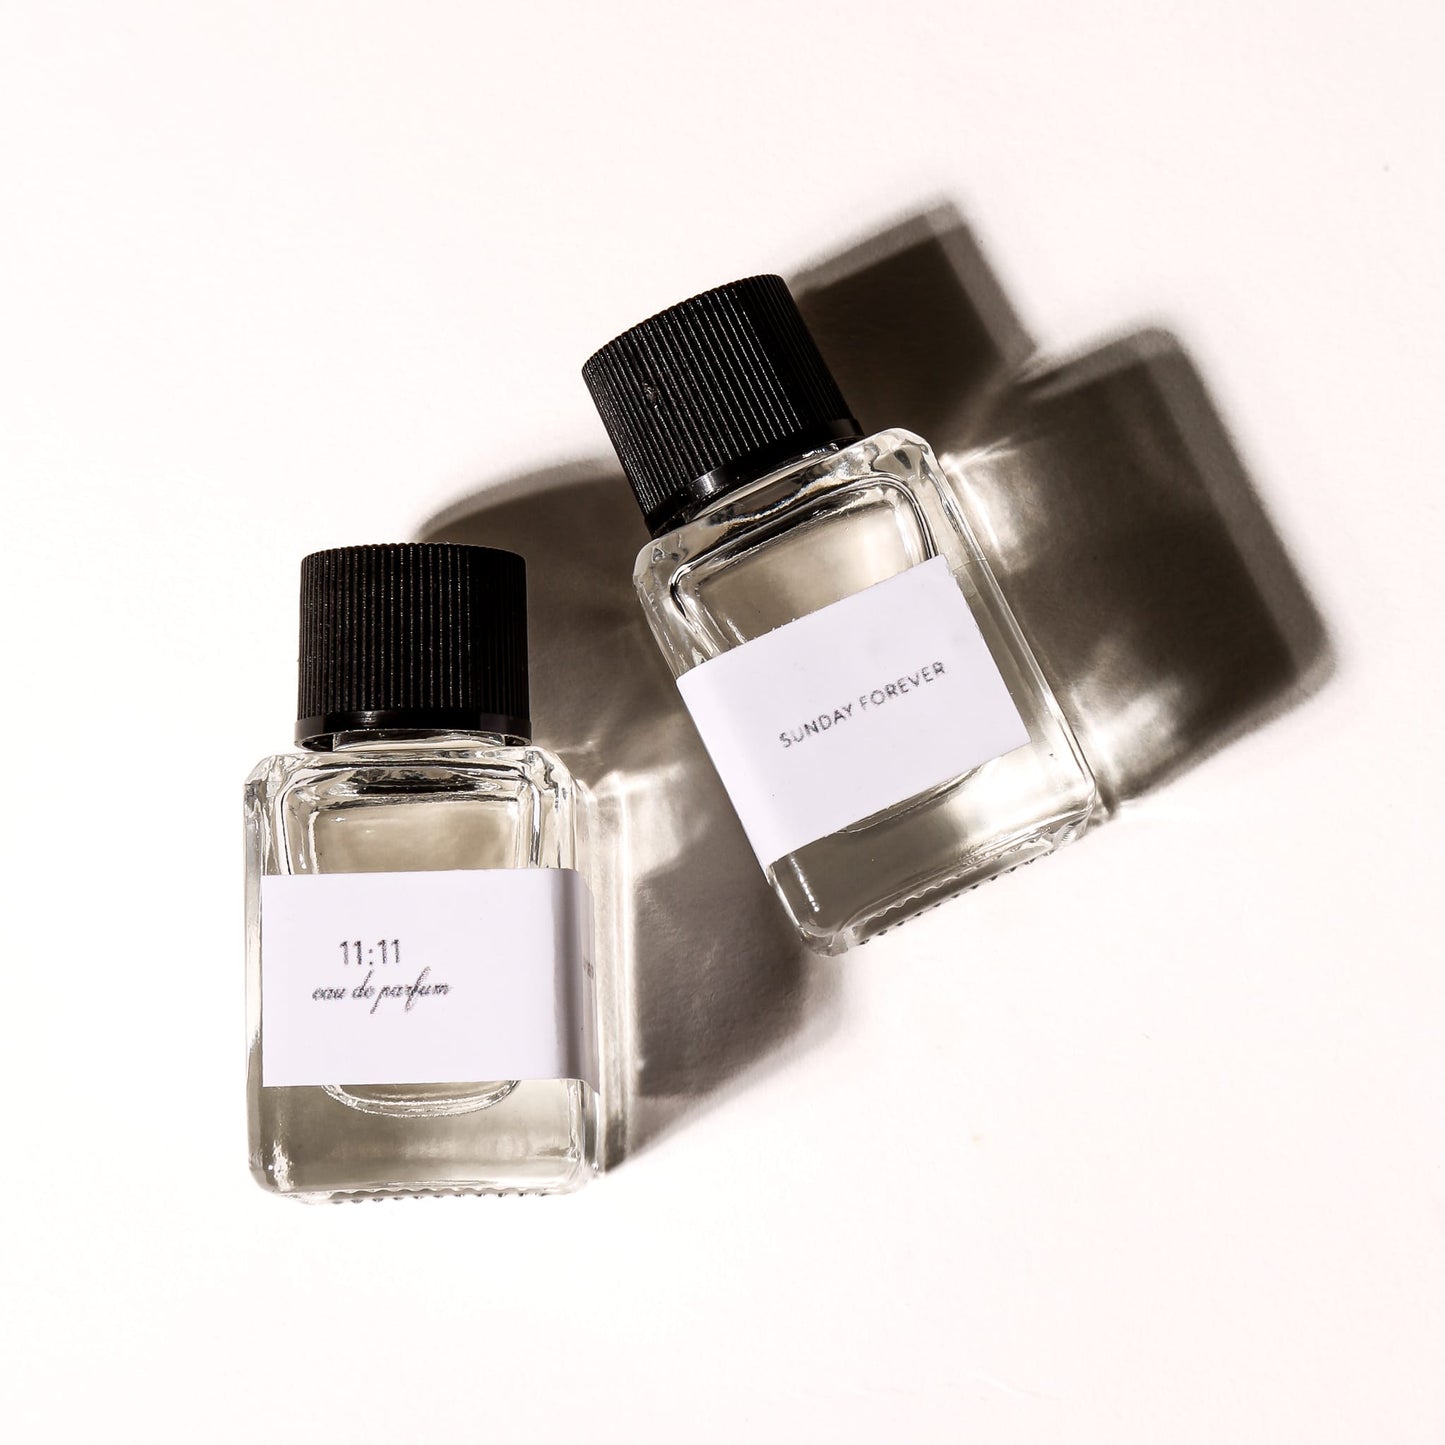 The Sunday Forever Scent Discovery Set